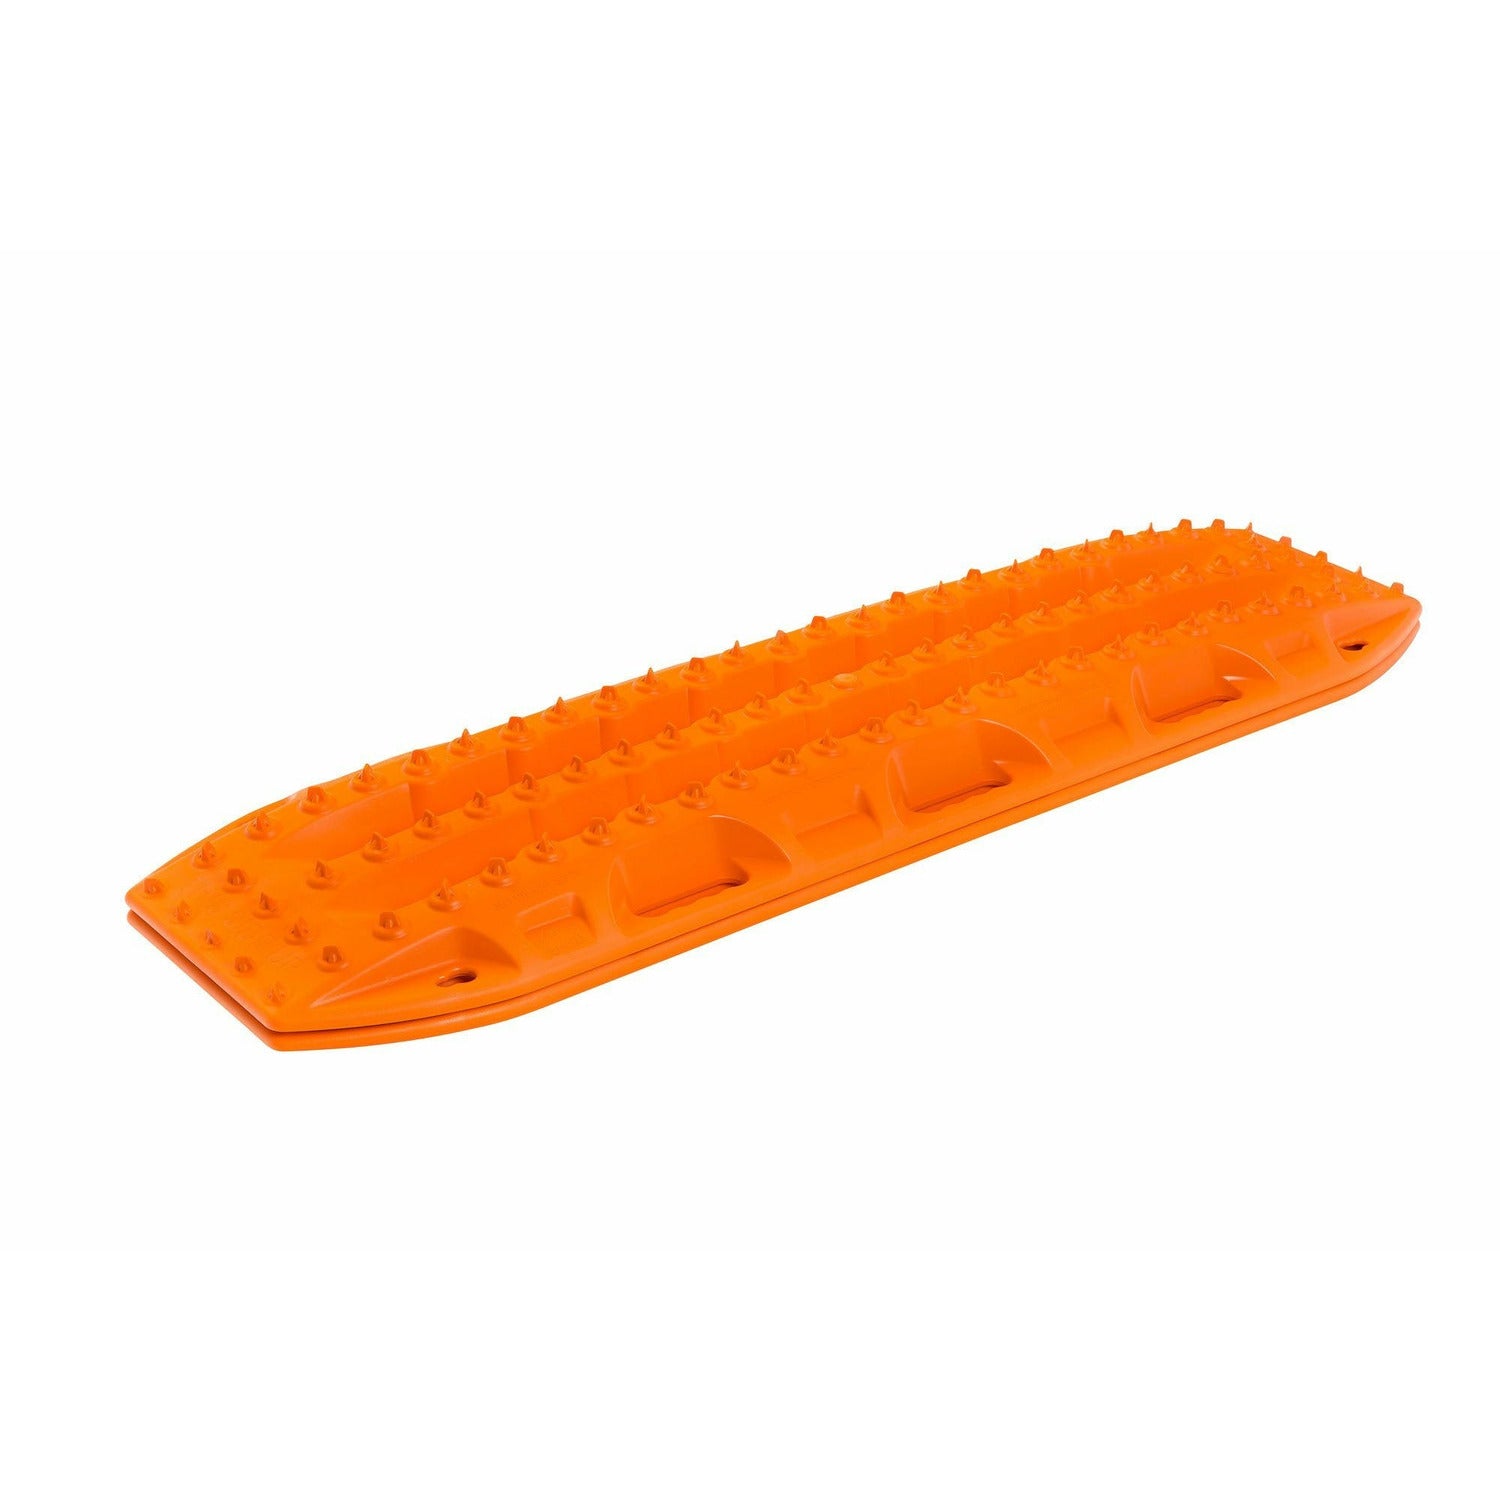 MAXTRAX MKII Signature Orange Recovery Boards  Recovery Gear MAXTRAX- Adventure Imports